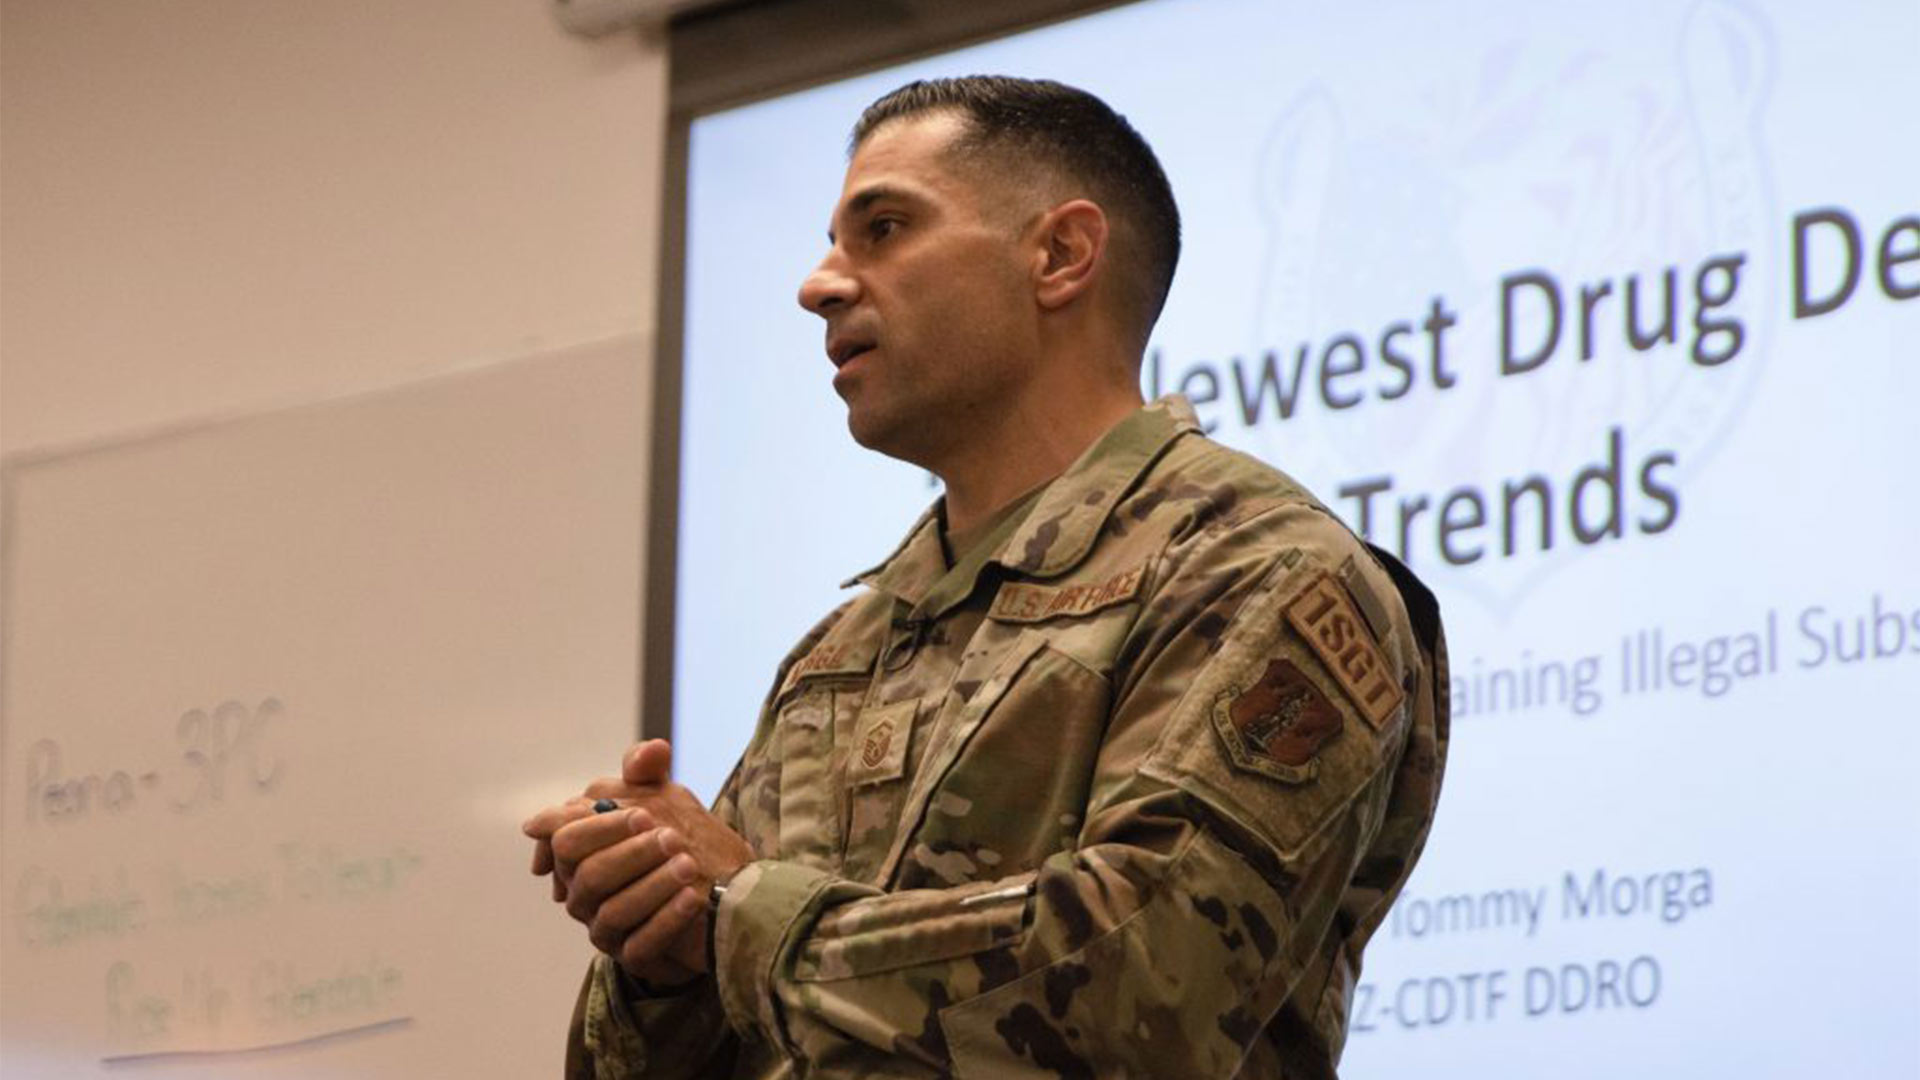 National Guard Sgt. Tommy Morga educates parents about how drugs like fentanyl are sold through social media apps such as Snapchat. Although drug dealers operate through many social media platforms, experts are most worried about Snapchat due to the app’s anonymity, disappearing messages, and lack of third-party monitoring. 